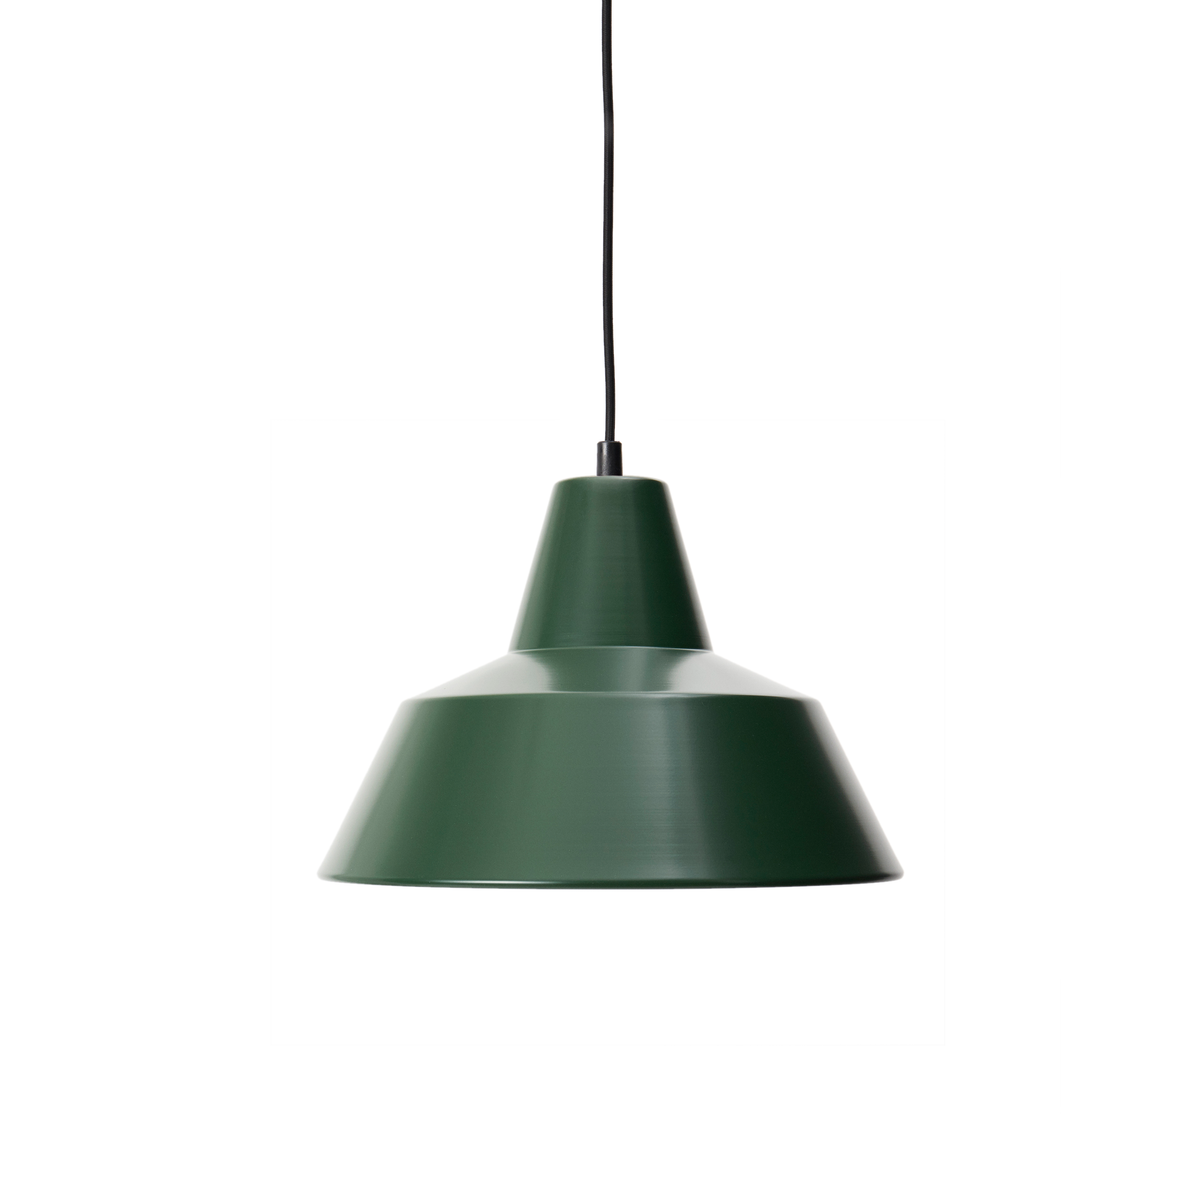 Made by Hand, Workshop Pendant Lamp W3, Wine Red, Pendant,